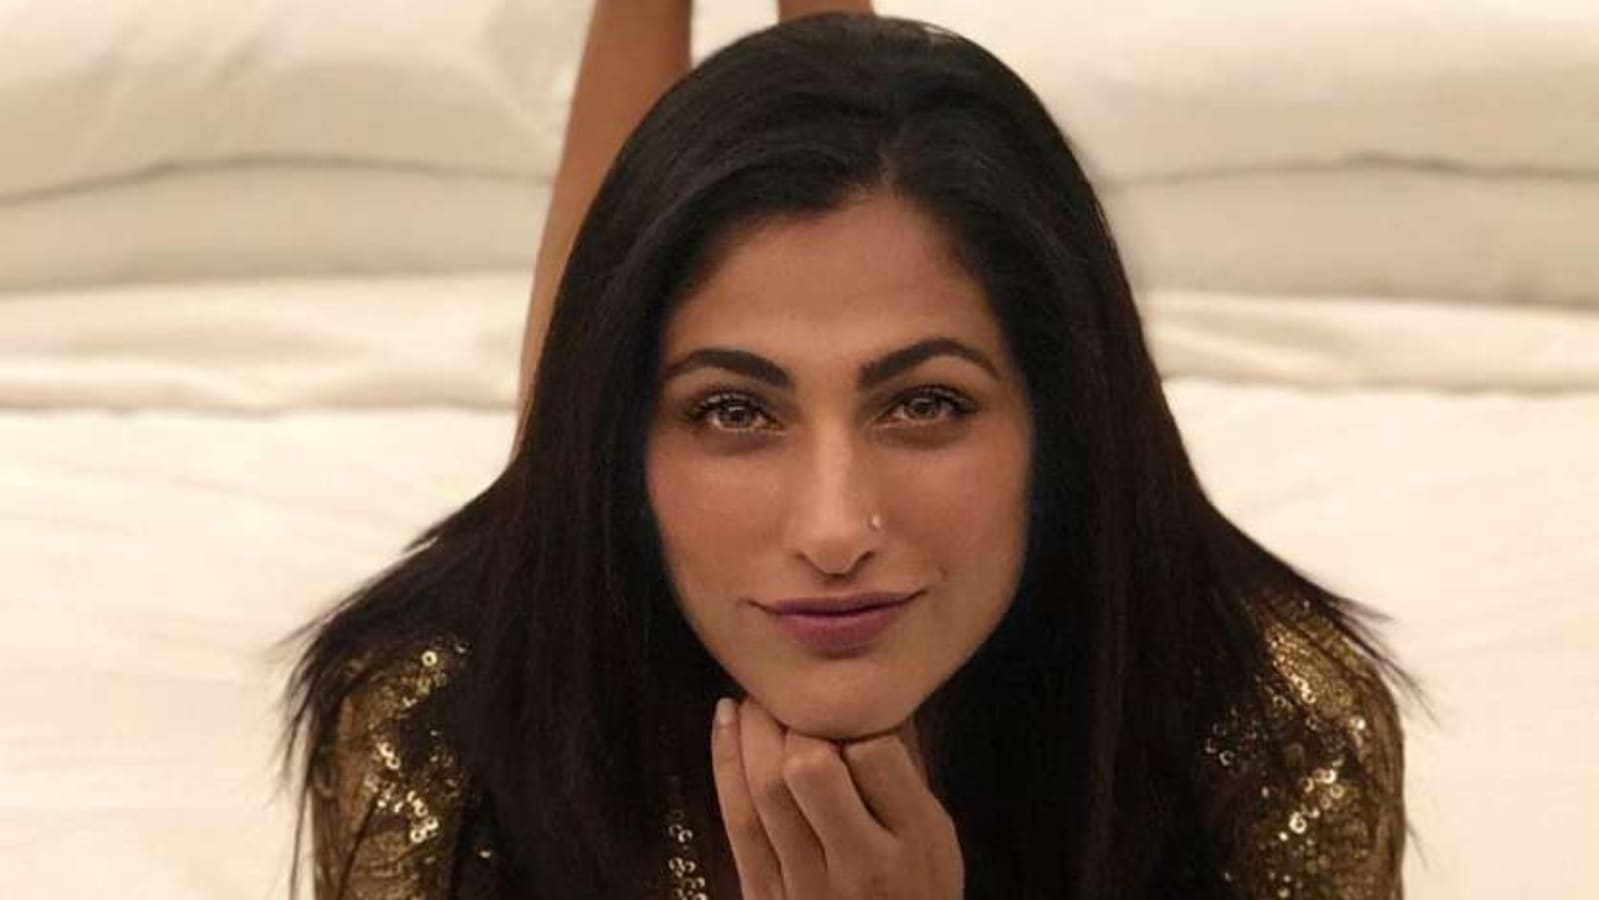 Kubbra Sait says she has ‘no regrets’ about getting an abortion after a one-night stand: ‘My choice was about me’